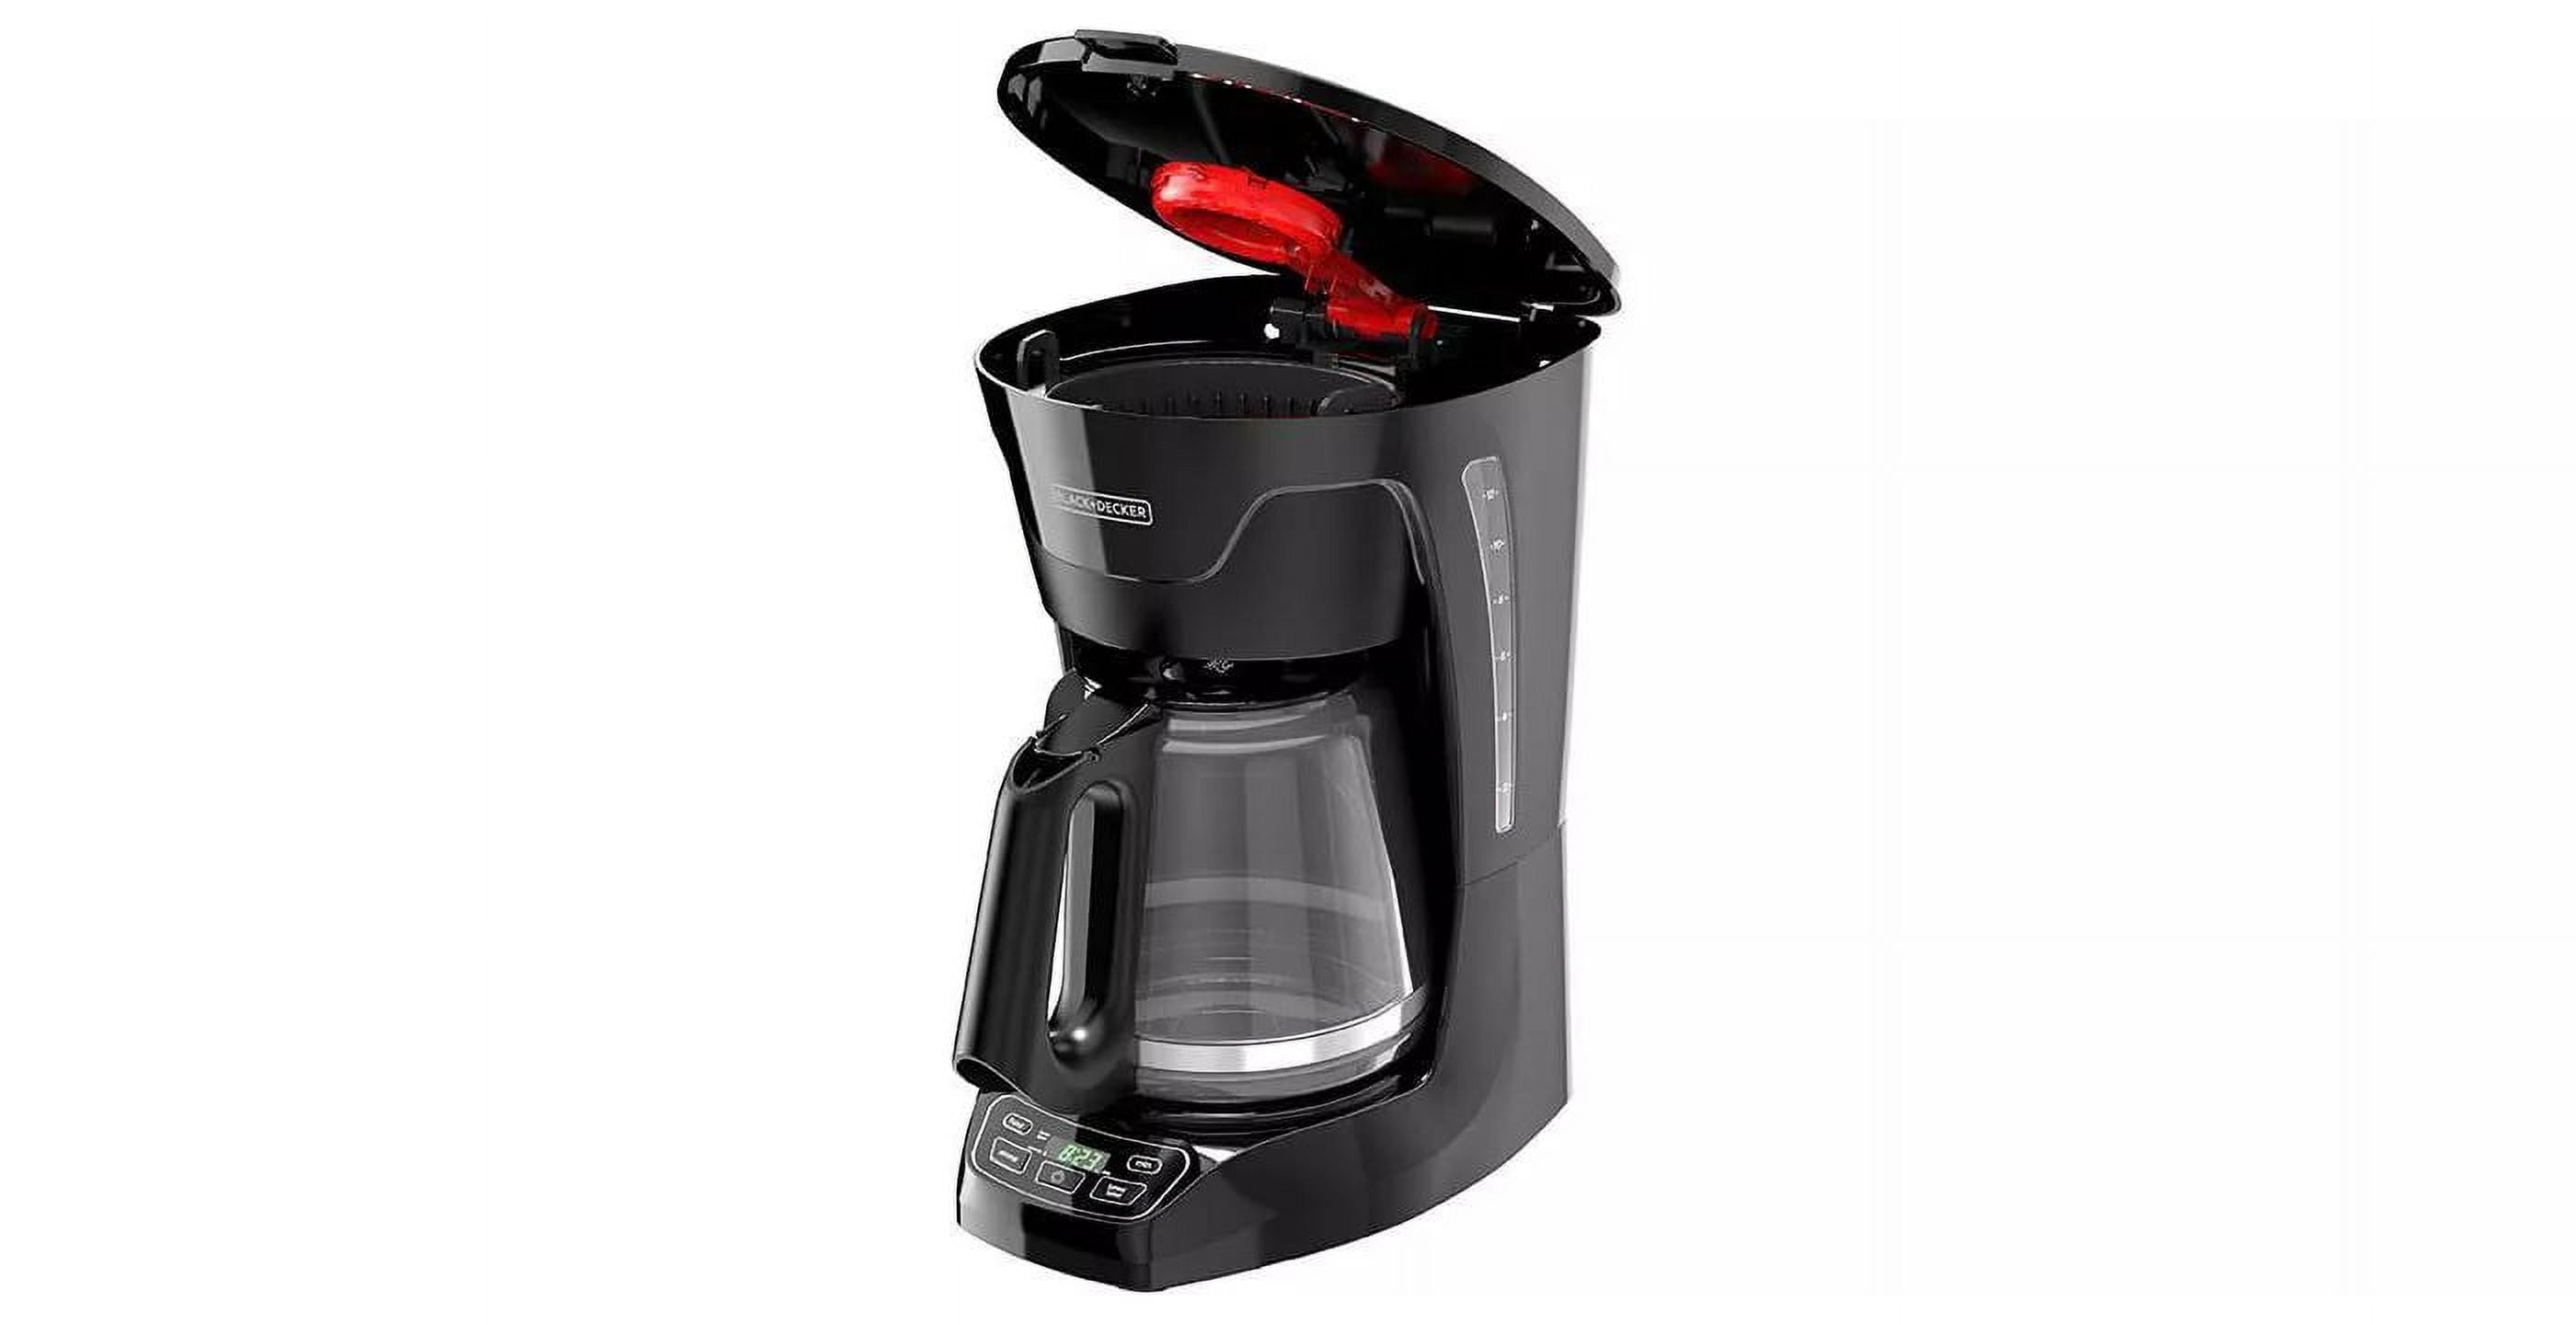 BLACK+DECKER 12 Cup Thermal Programmable Coffee Maker with Brew Strength  and VORTEX Technology, Black/Steel, CM2046S